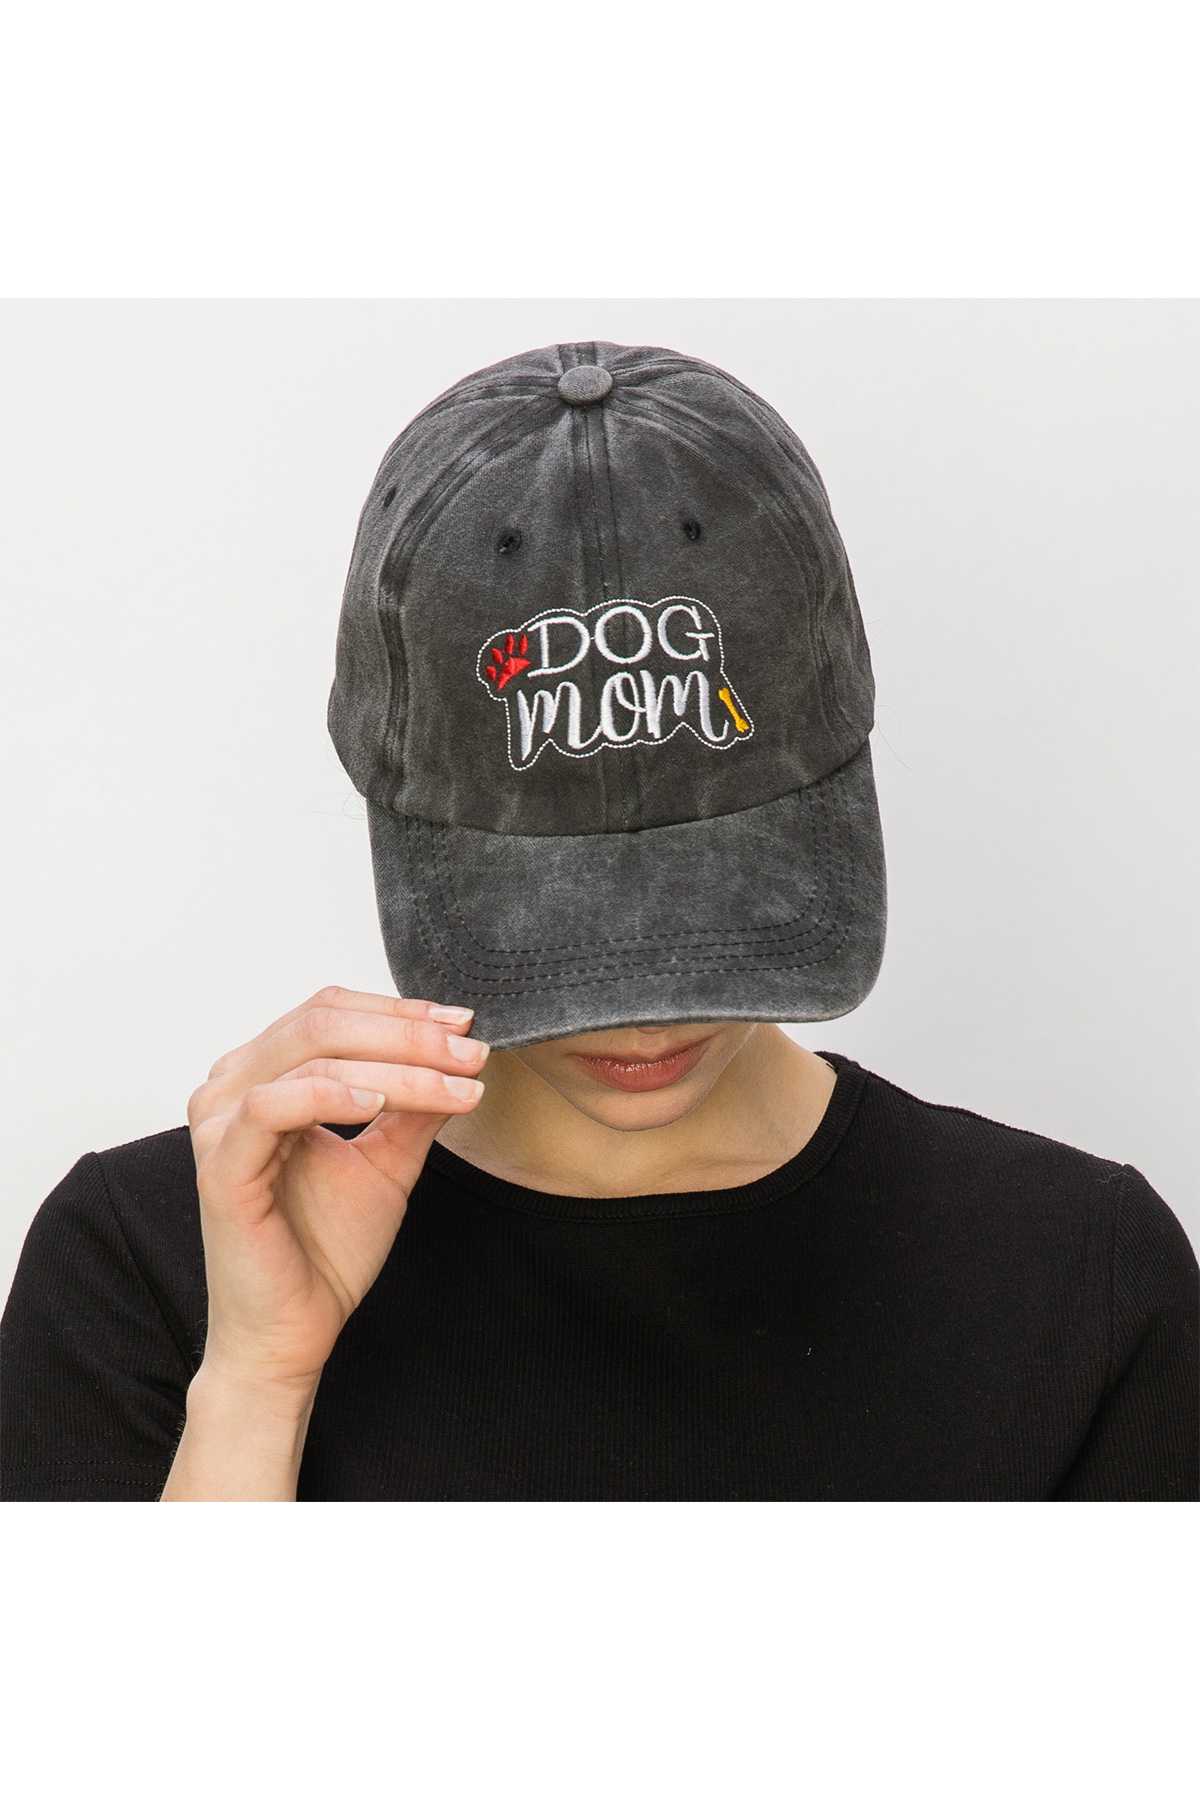 DOG MOM Embroidery Pigment Cap